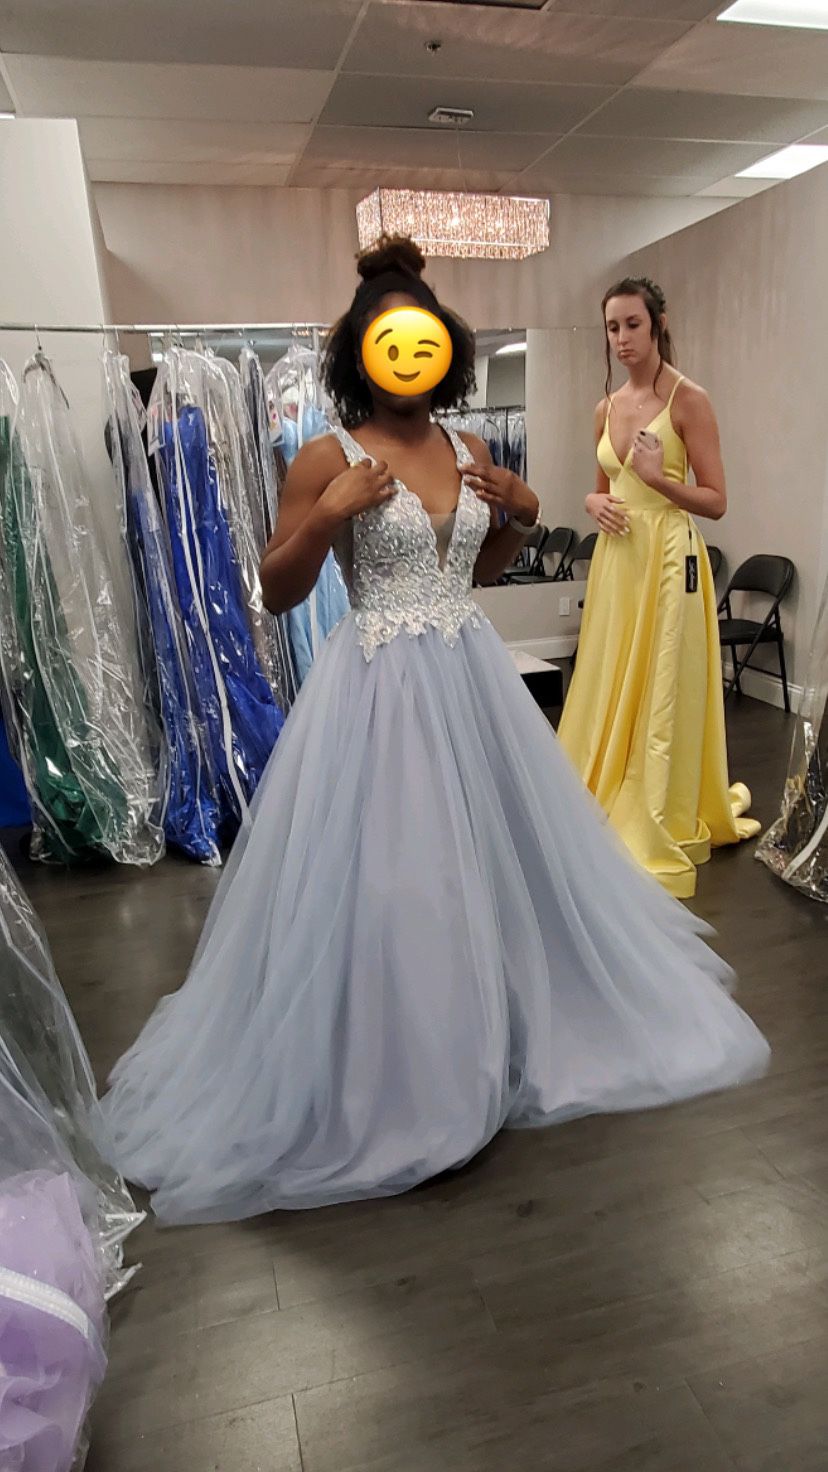 Prom/Quinceanera Dress (Size 6)